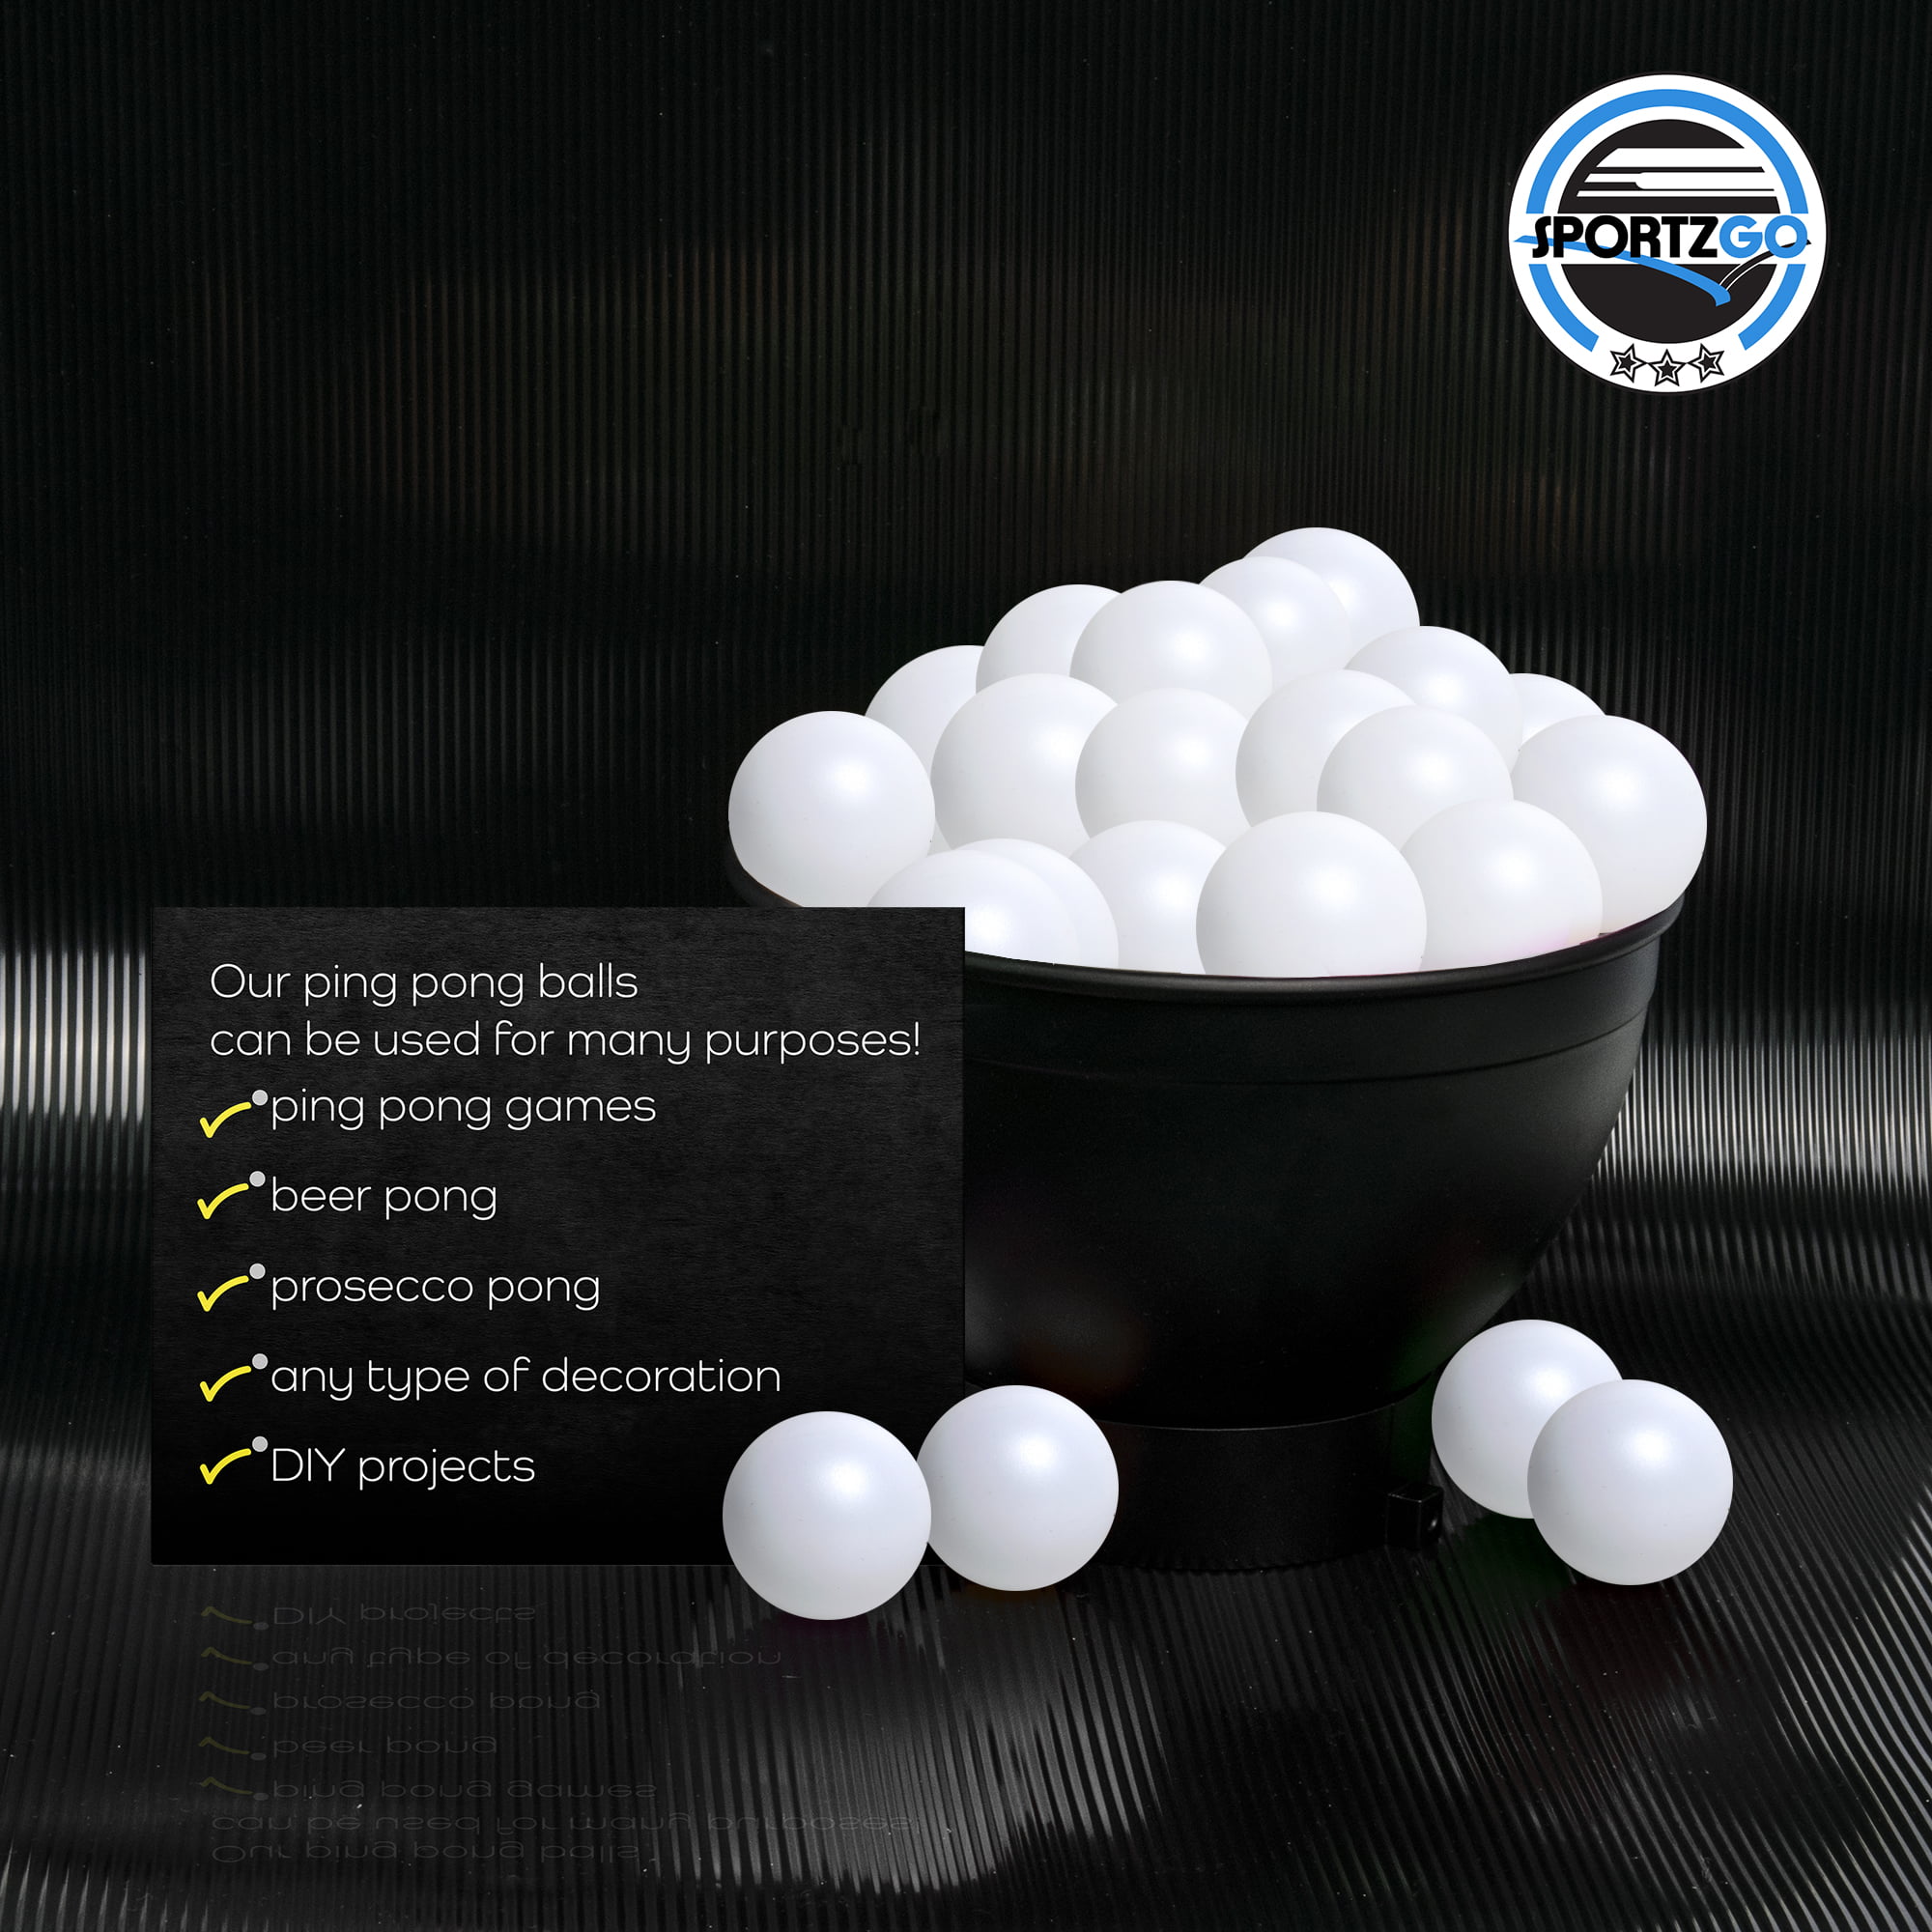 38mm Ping Pong Washable Plastic for Decoration Crafts or Party Game Balls Totem World 24 White Beer Pong Balls 